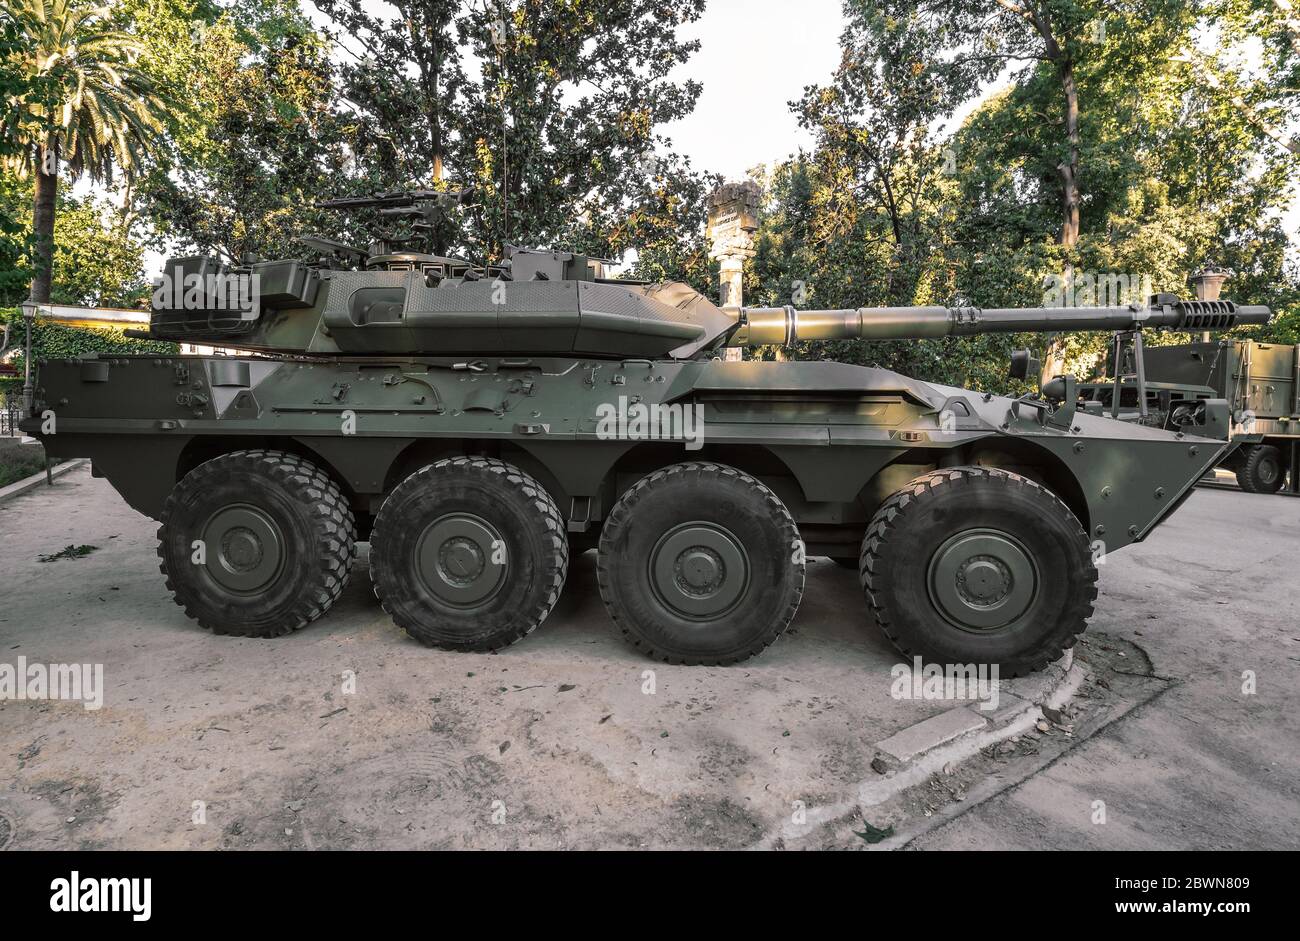 Centauro High Resolution Stock Photography and Images - Alamy